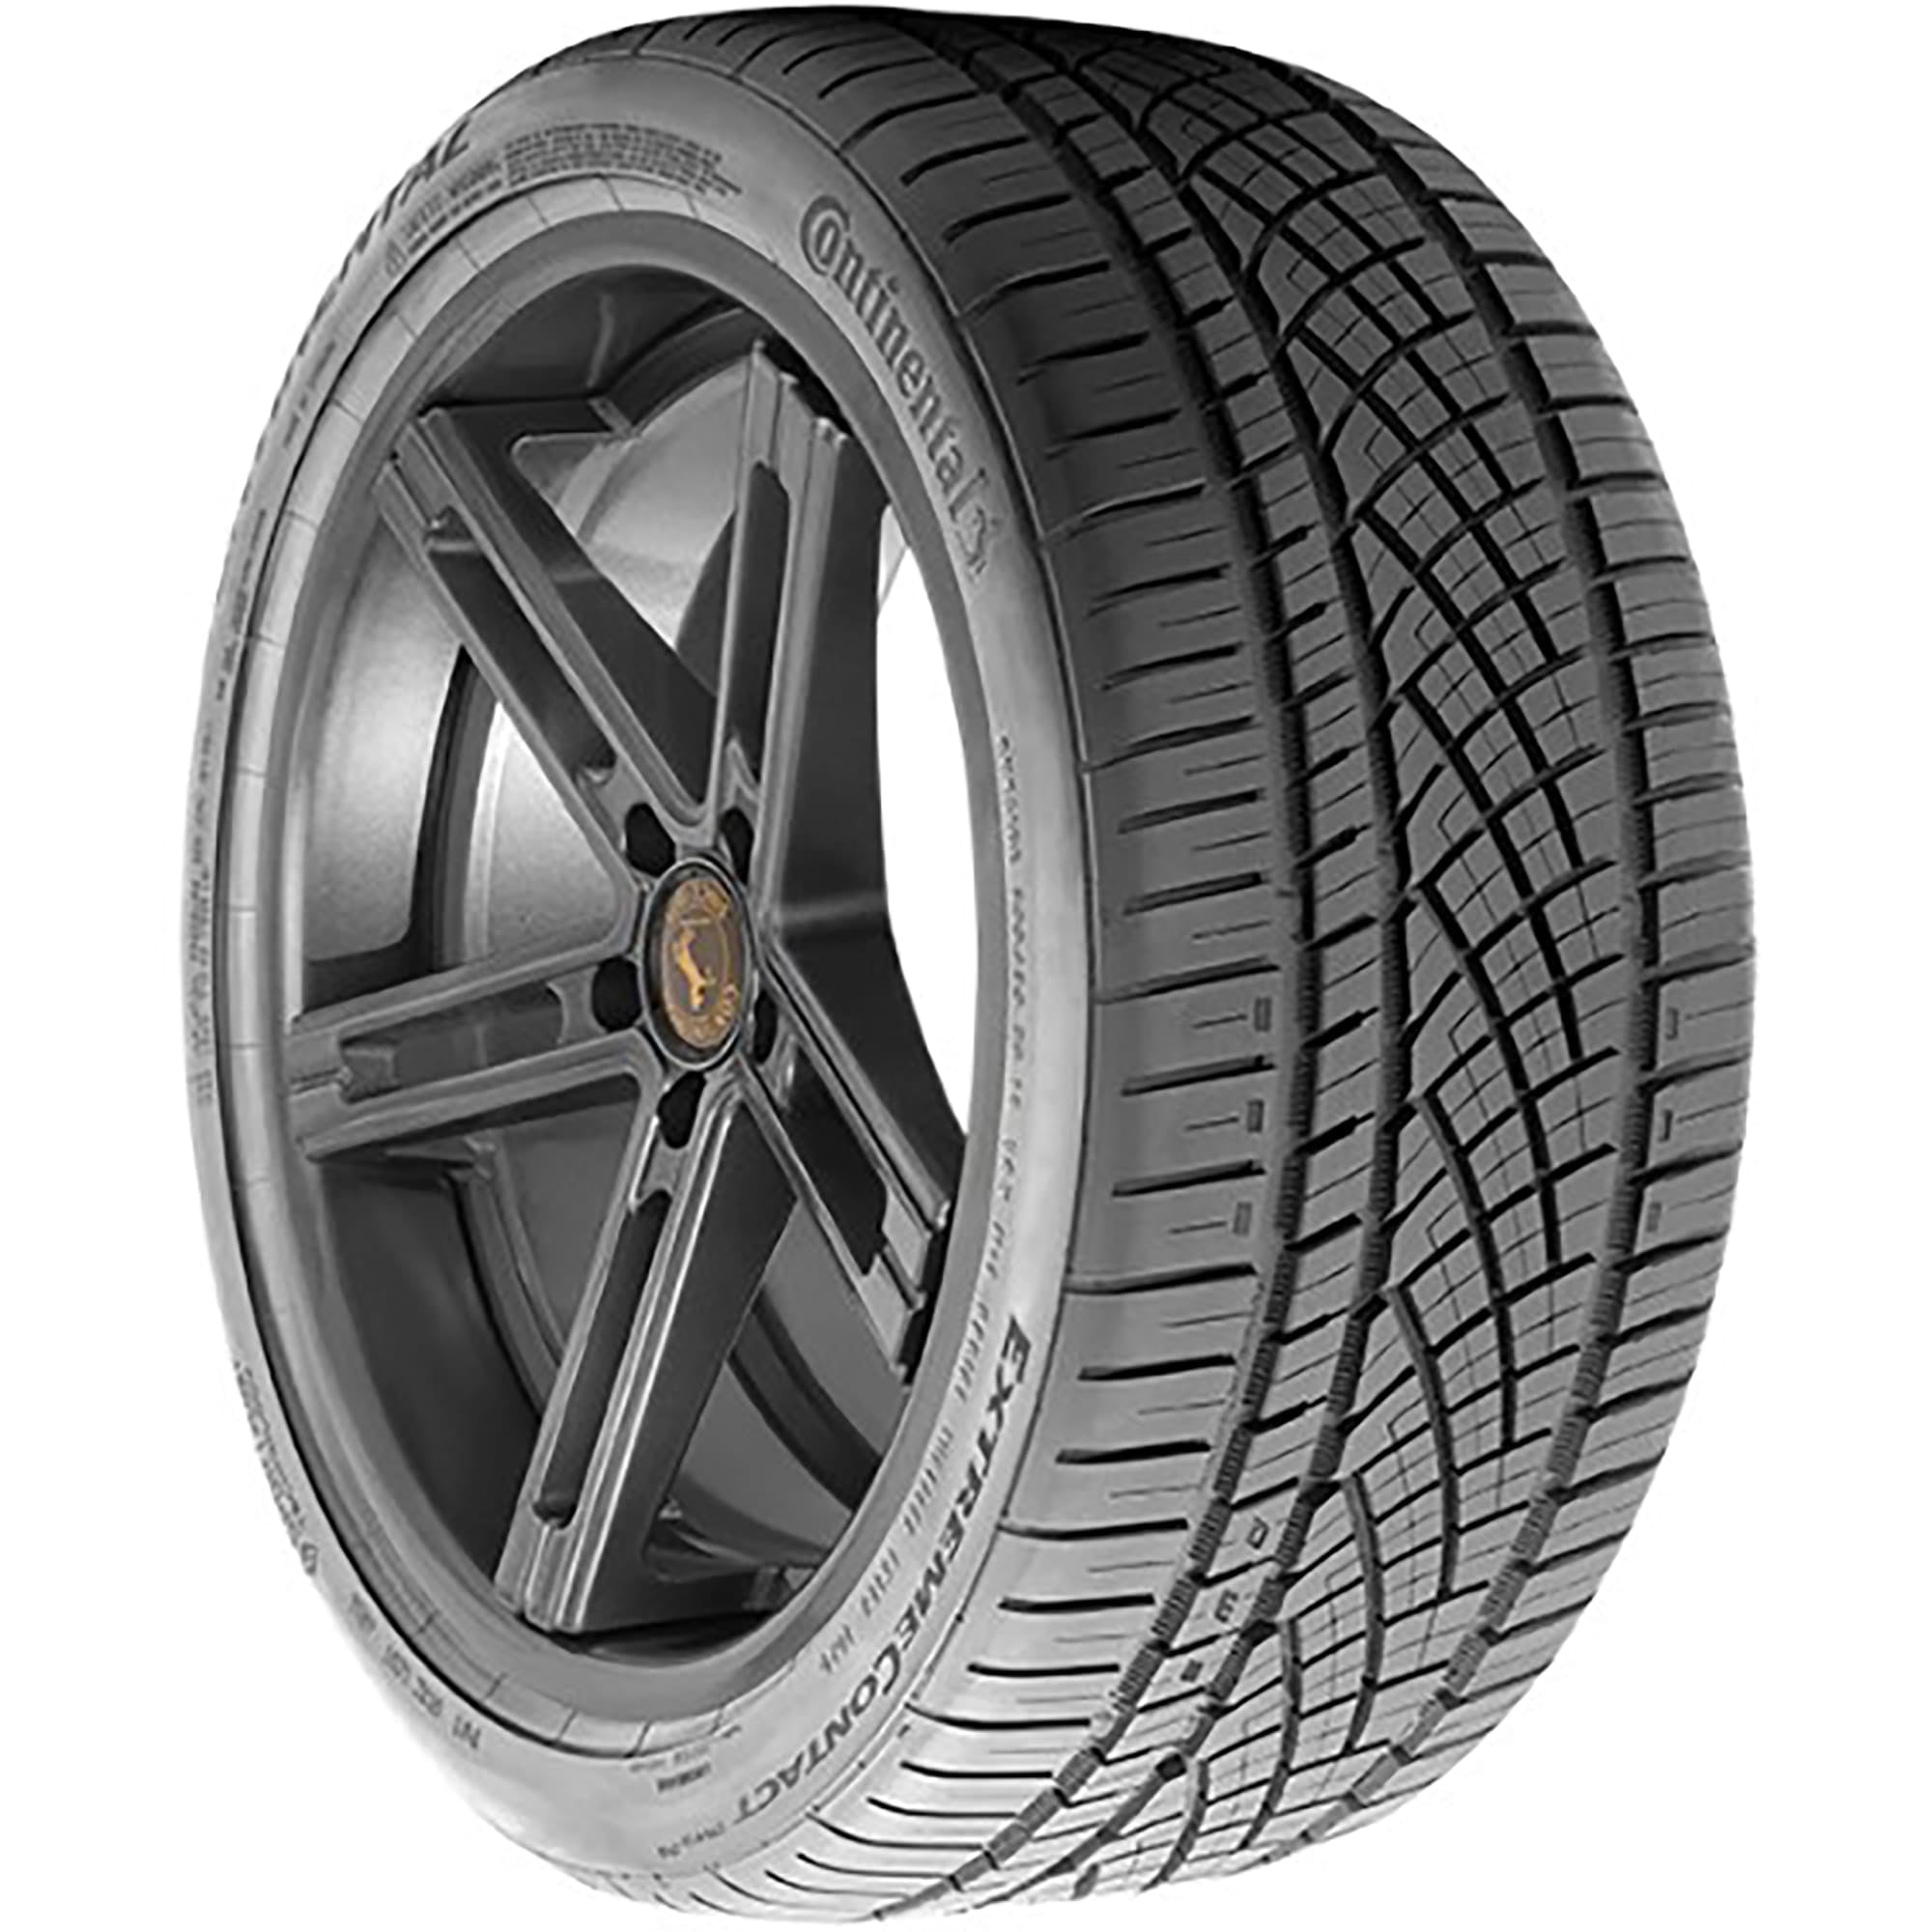 Continental ExtremeContact DWS06 UHP All Season 255/45ZR18 103Y XL  Passenger Tire